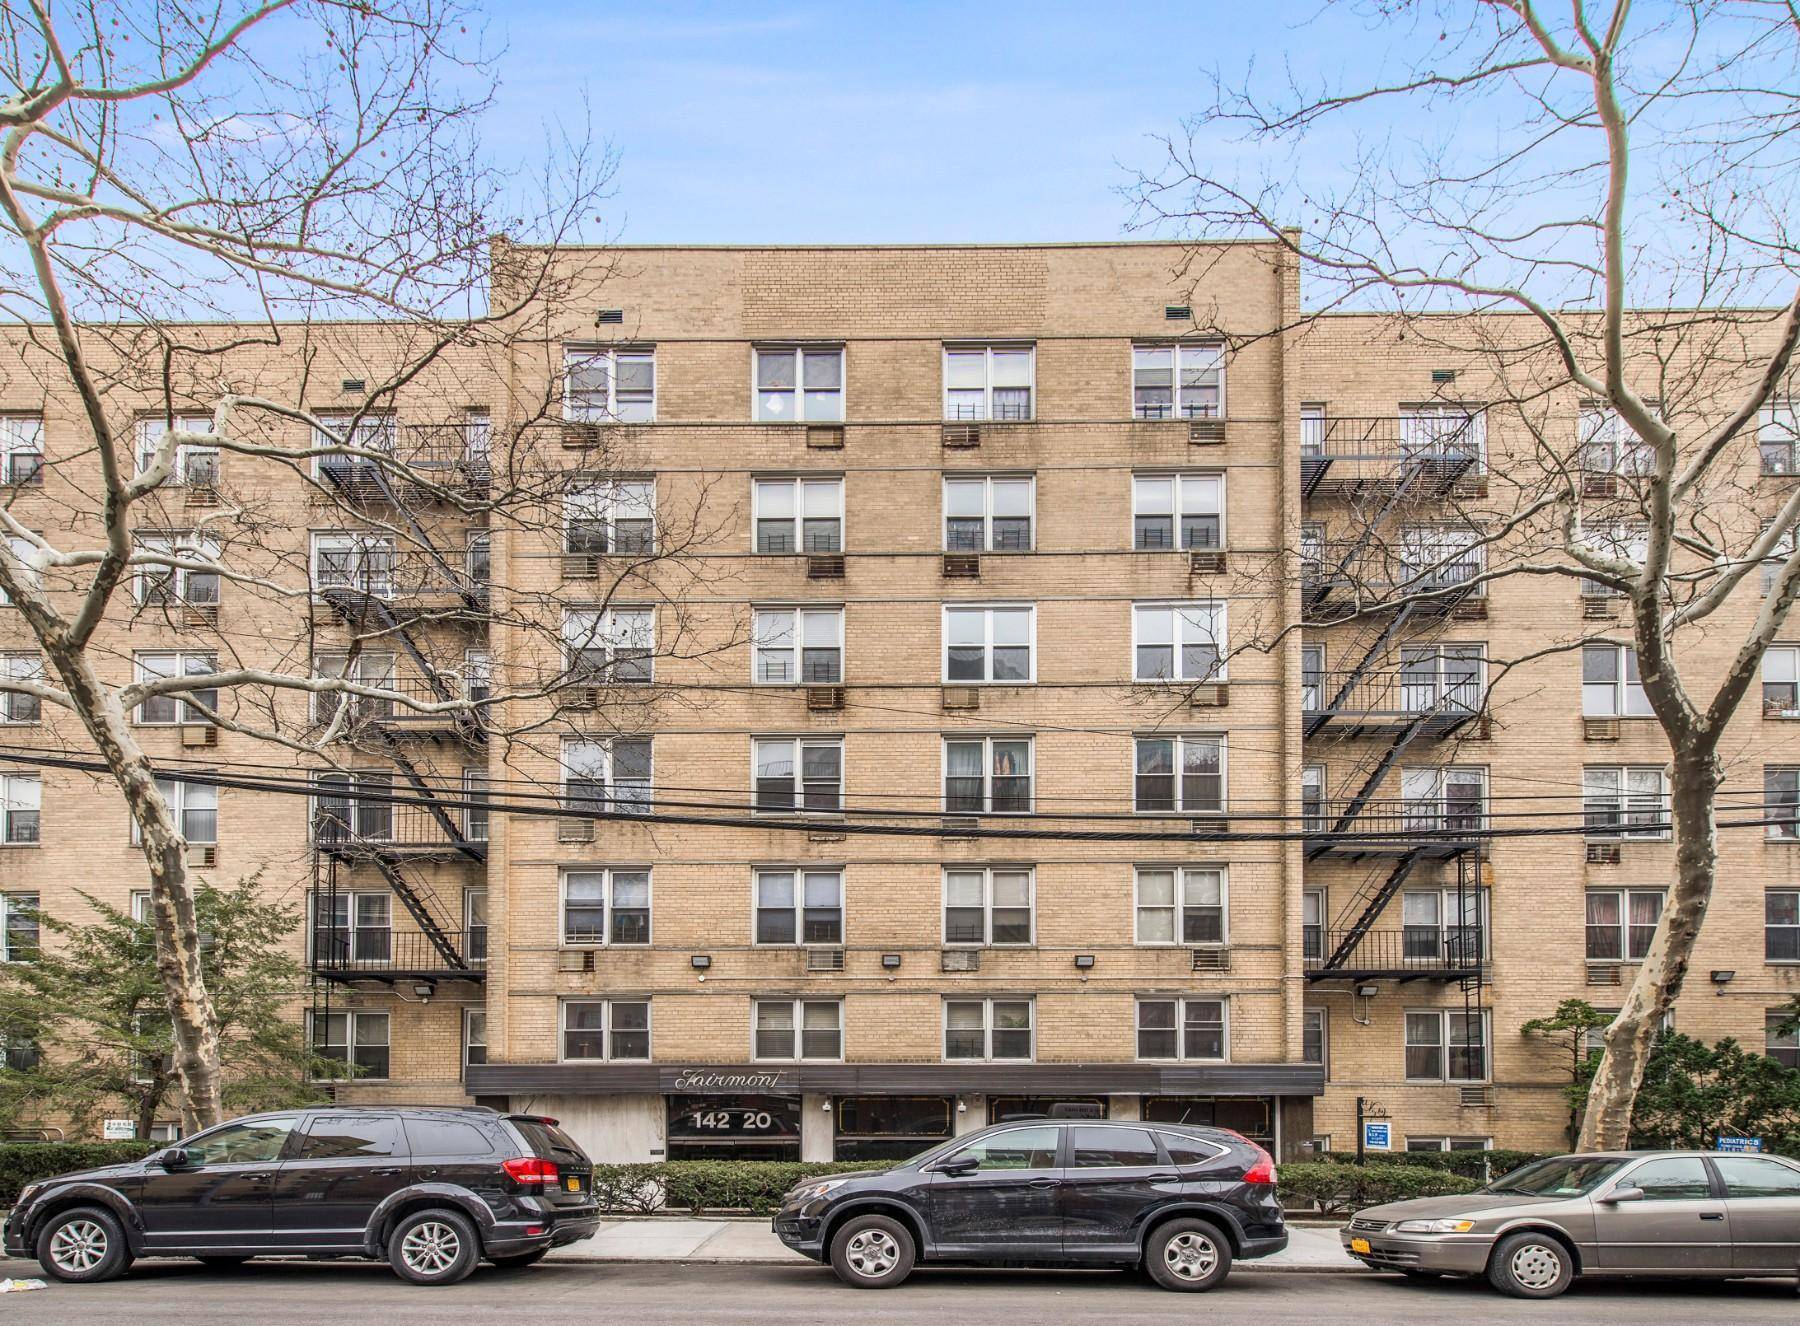 This modern, newly renovated one bedroom apartment features new oak hardwood floors, a large living room, separate kitchen with stainless steel appliances and a glass tiled back splash, sparkling new ...